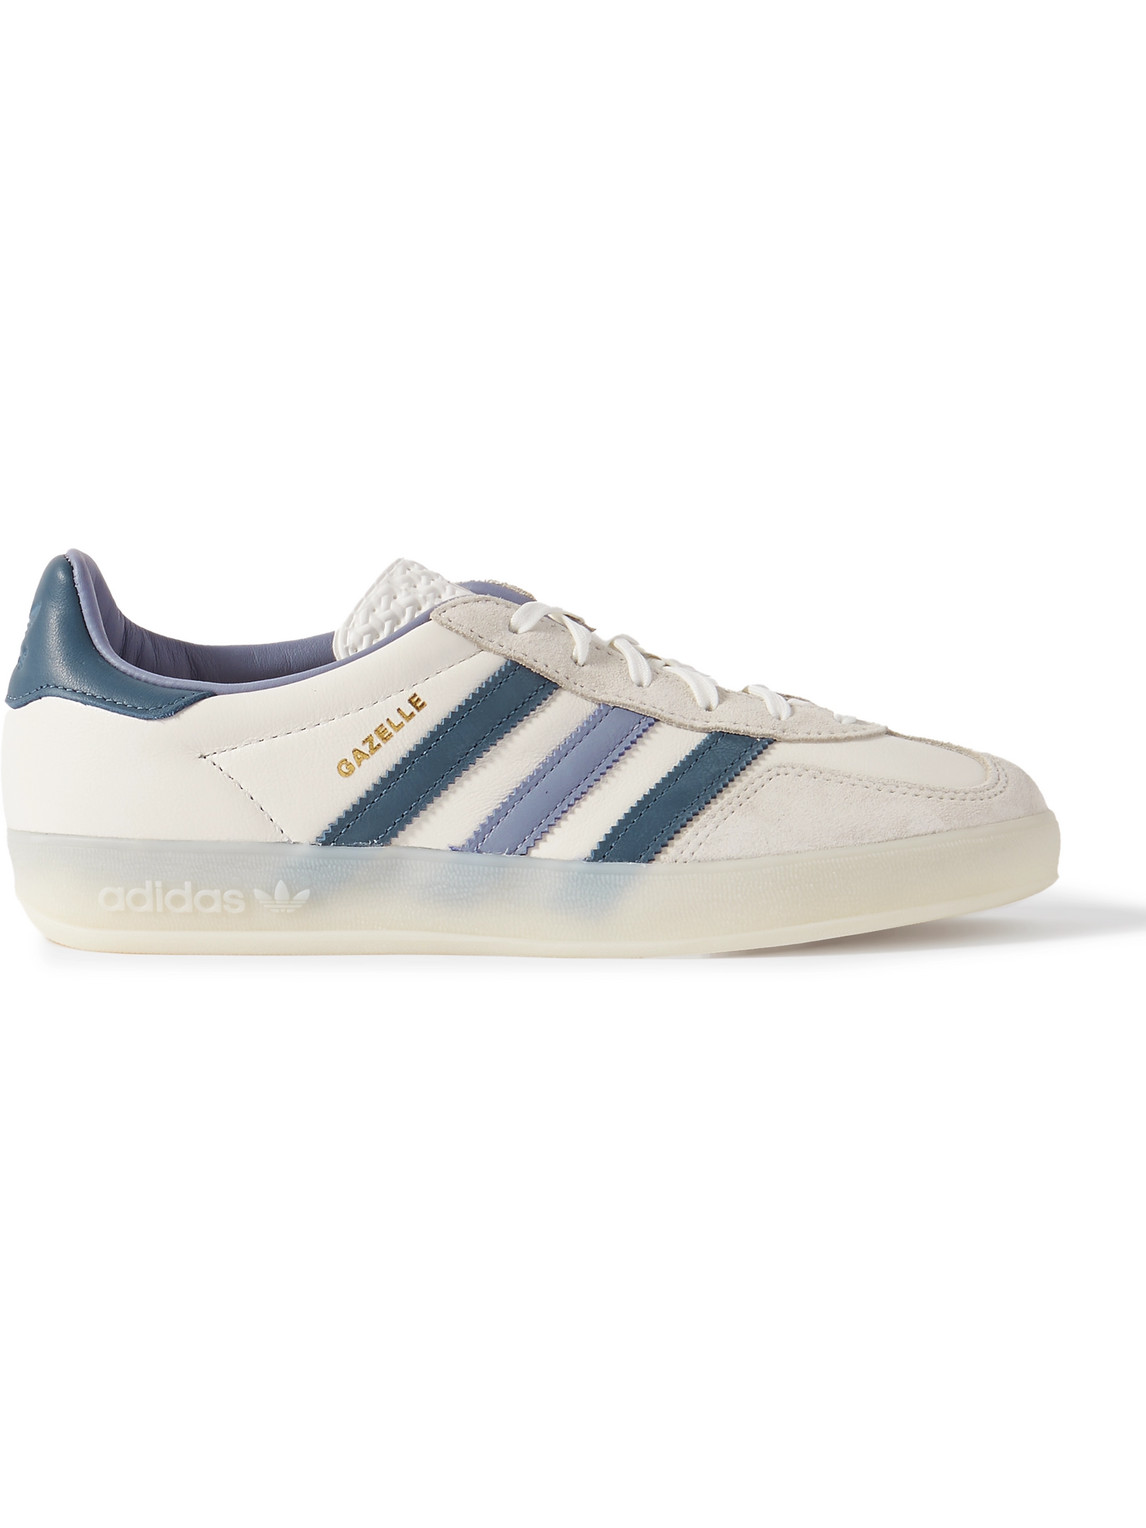 Adidas Originals Gazelle Indoor Leather And Suede Trainers In Neutral